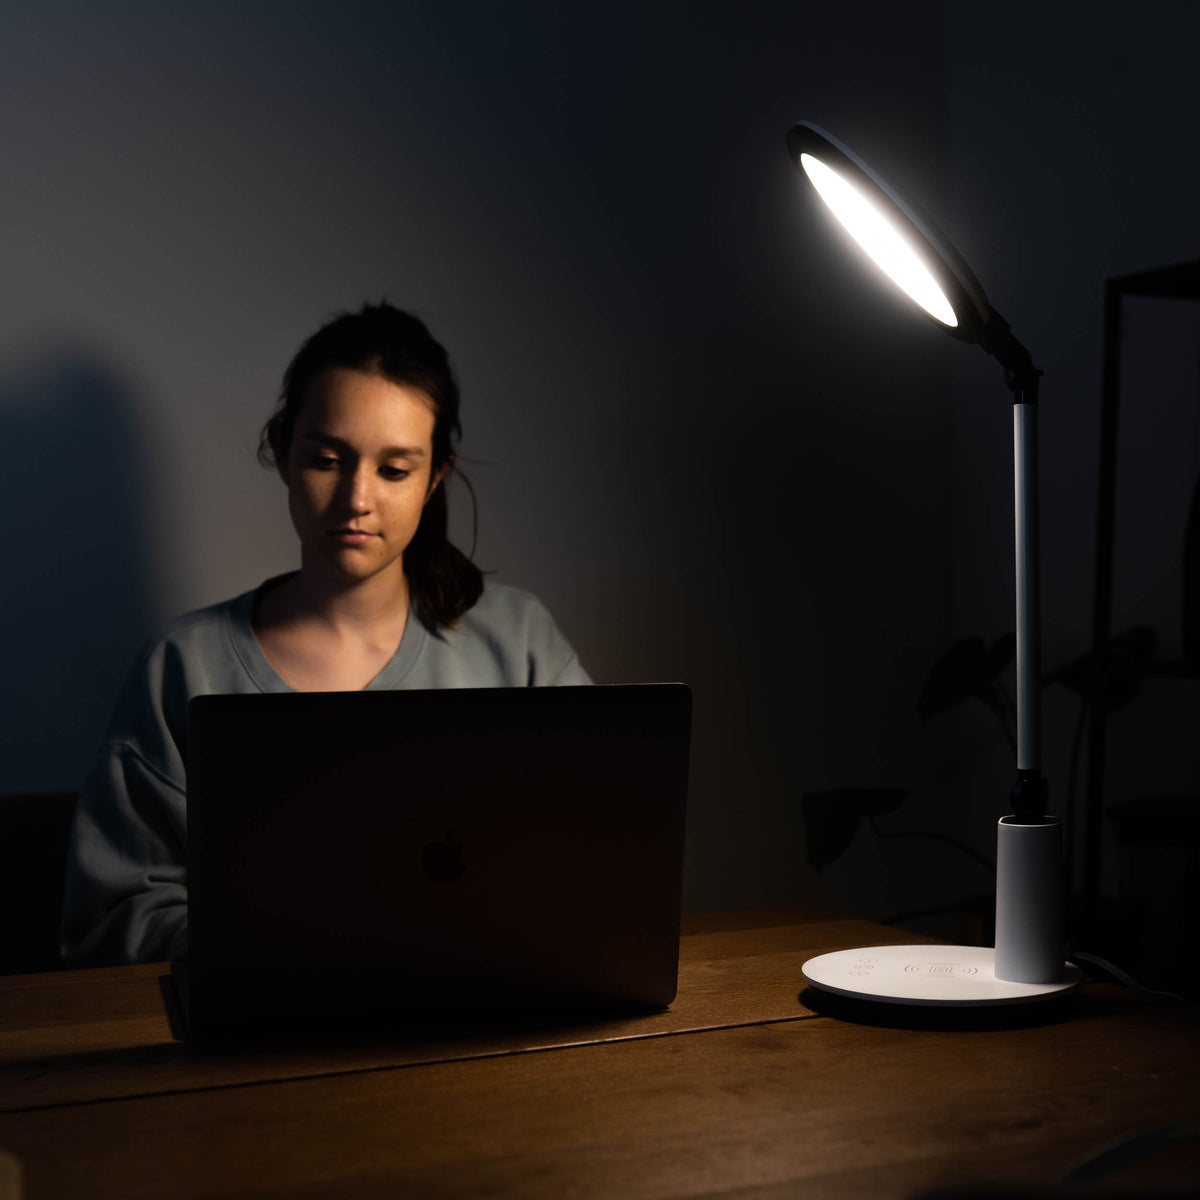 A woman on her laptop next to a therapy lamp in a dark room